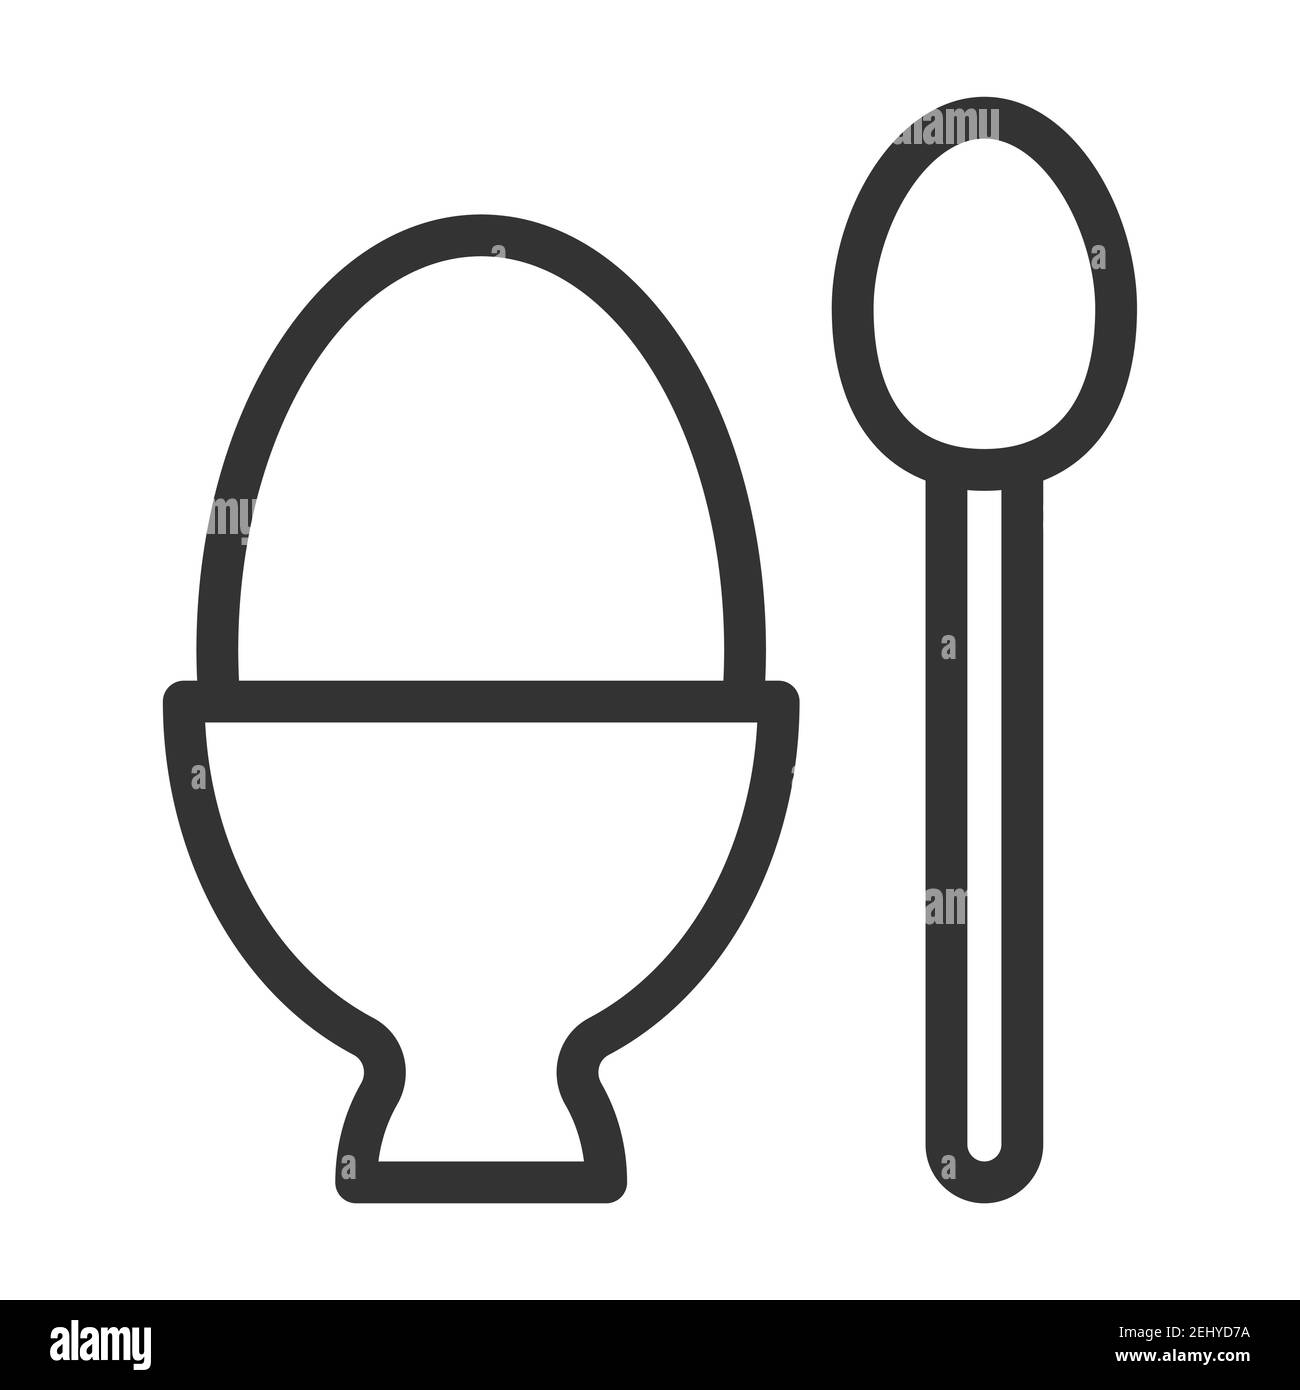 Crumpled egg in plate and spoon. Simple food icon in trendy line style isolated on white background for web apps and mobile concept. Vector Illustrati Stock Vector